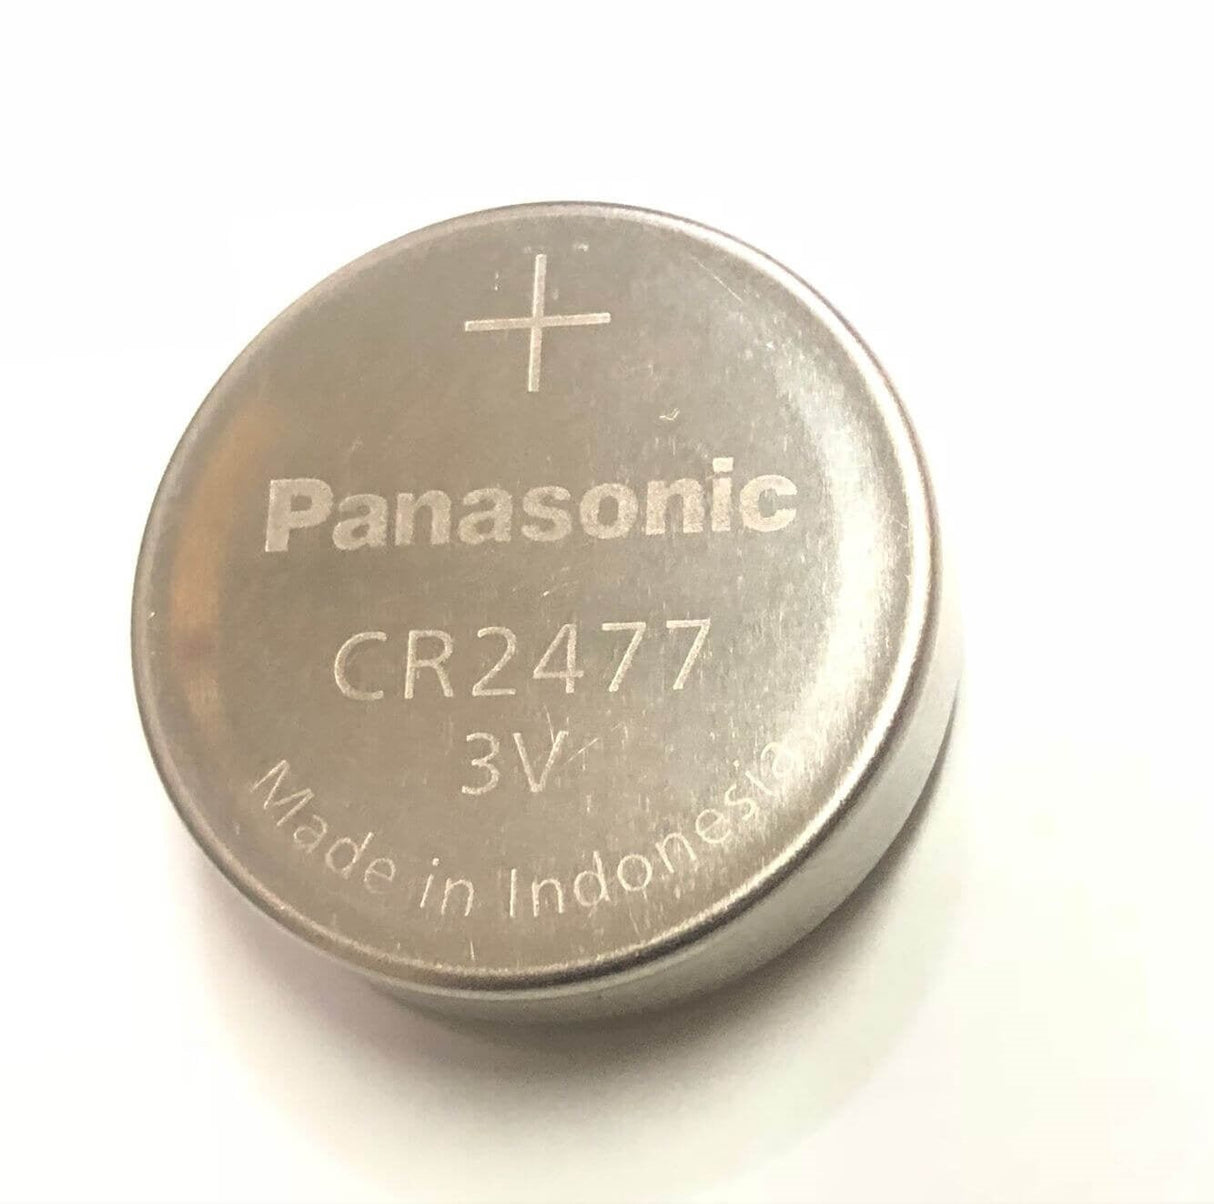 Panasonic Cr2477 3 Volt Lithium Battery Replacement Battery By Use Panasonic   